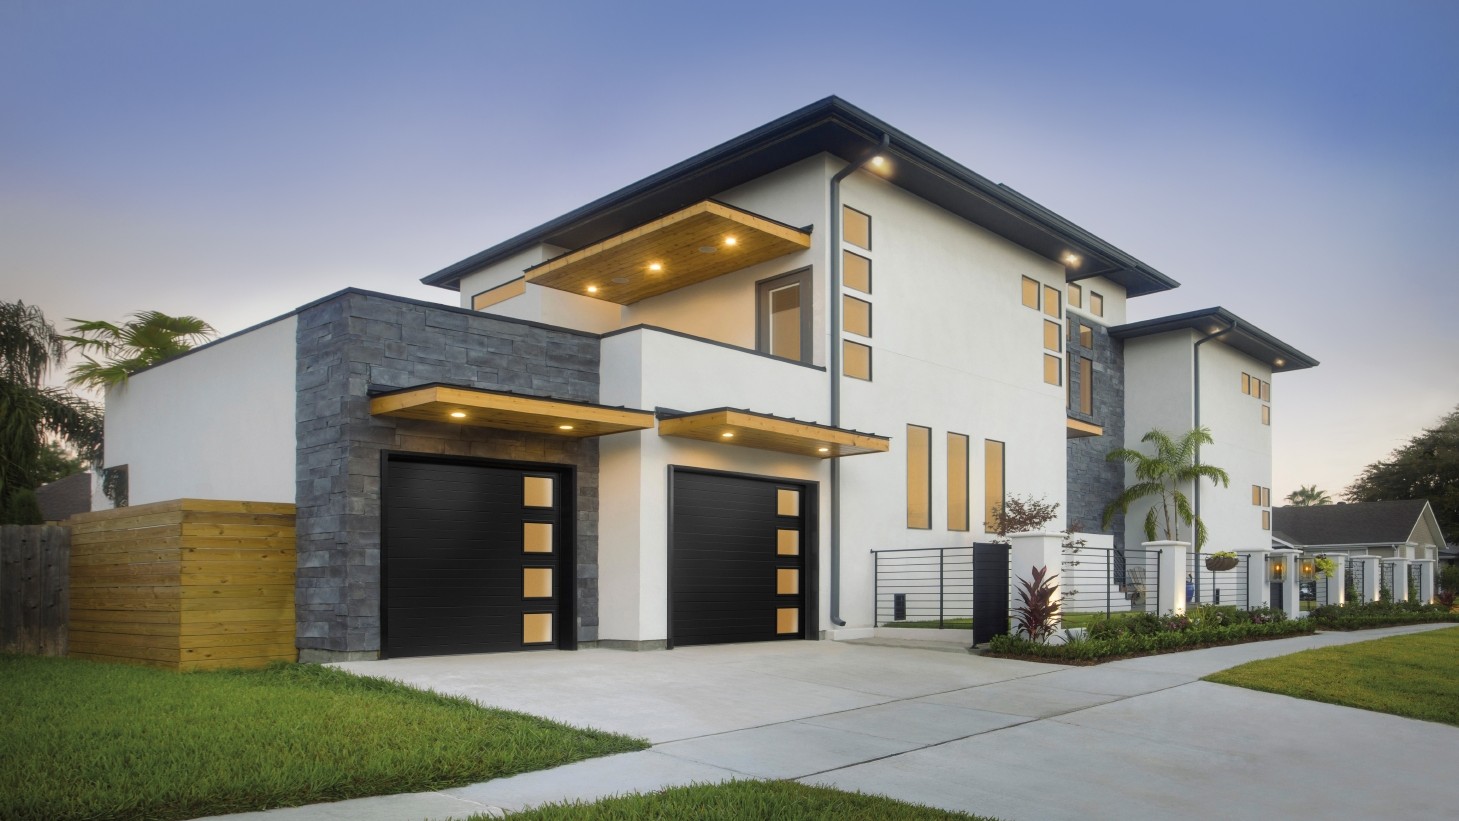 How to Choose a Garage Door - Prepare for Storms with Steel